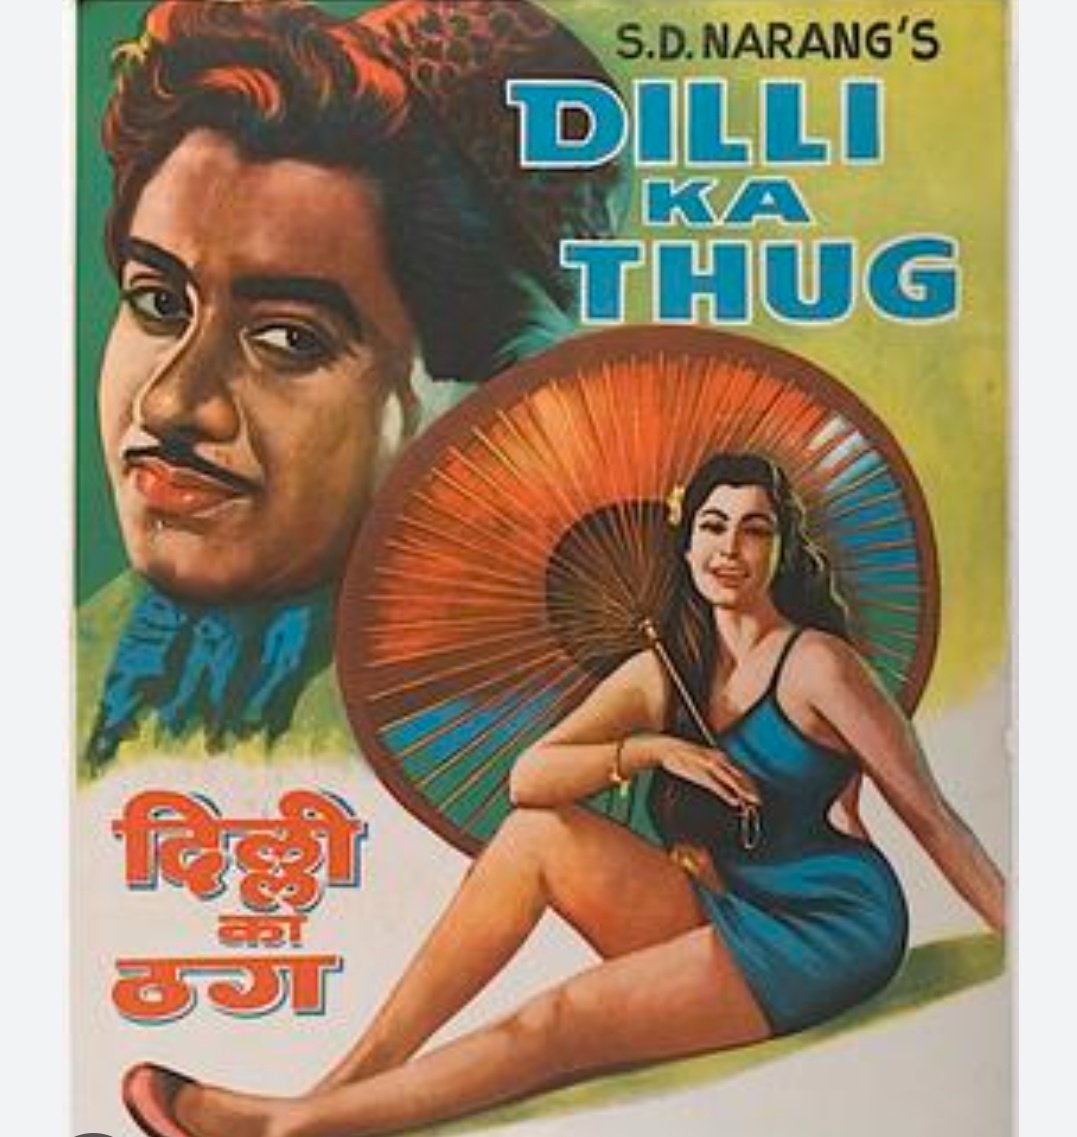 The movie was released in the '60s. The real thing is unfolding now. #DilliKaThug